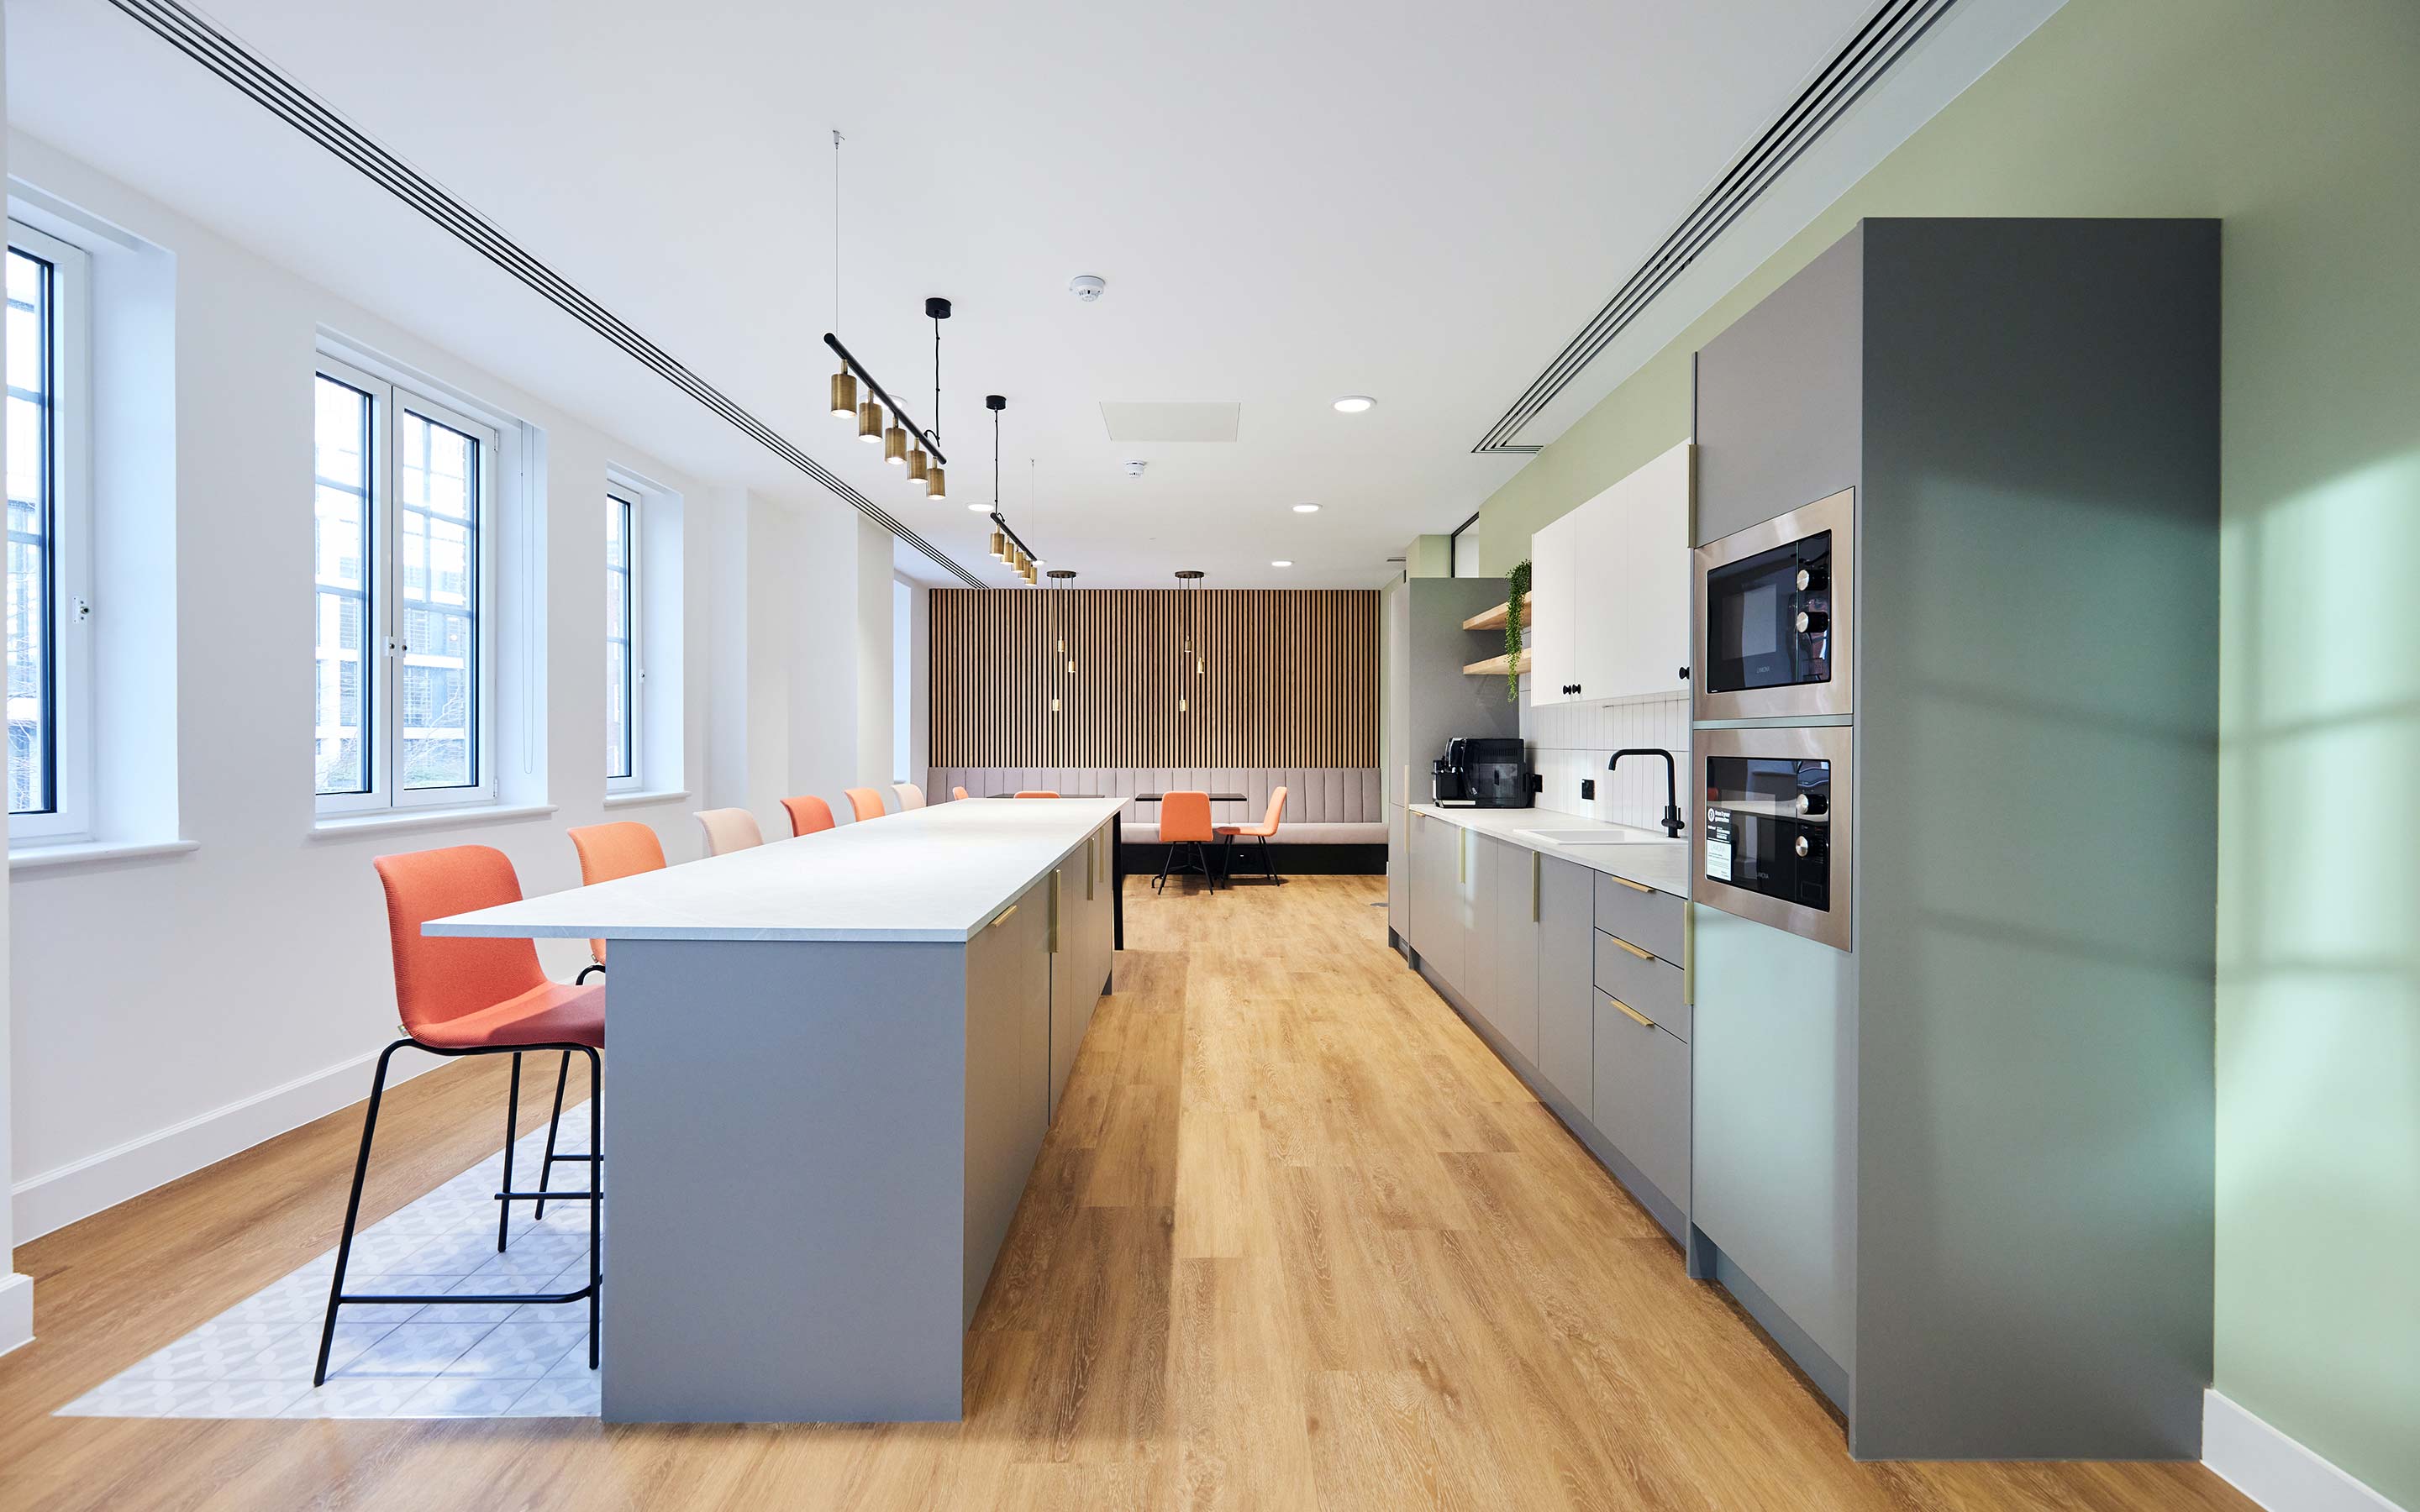 A contemporary kitchen in a London office with timber flooring, and soft grey kitchen cabinets